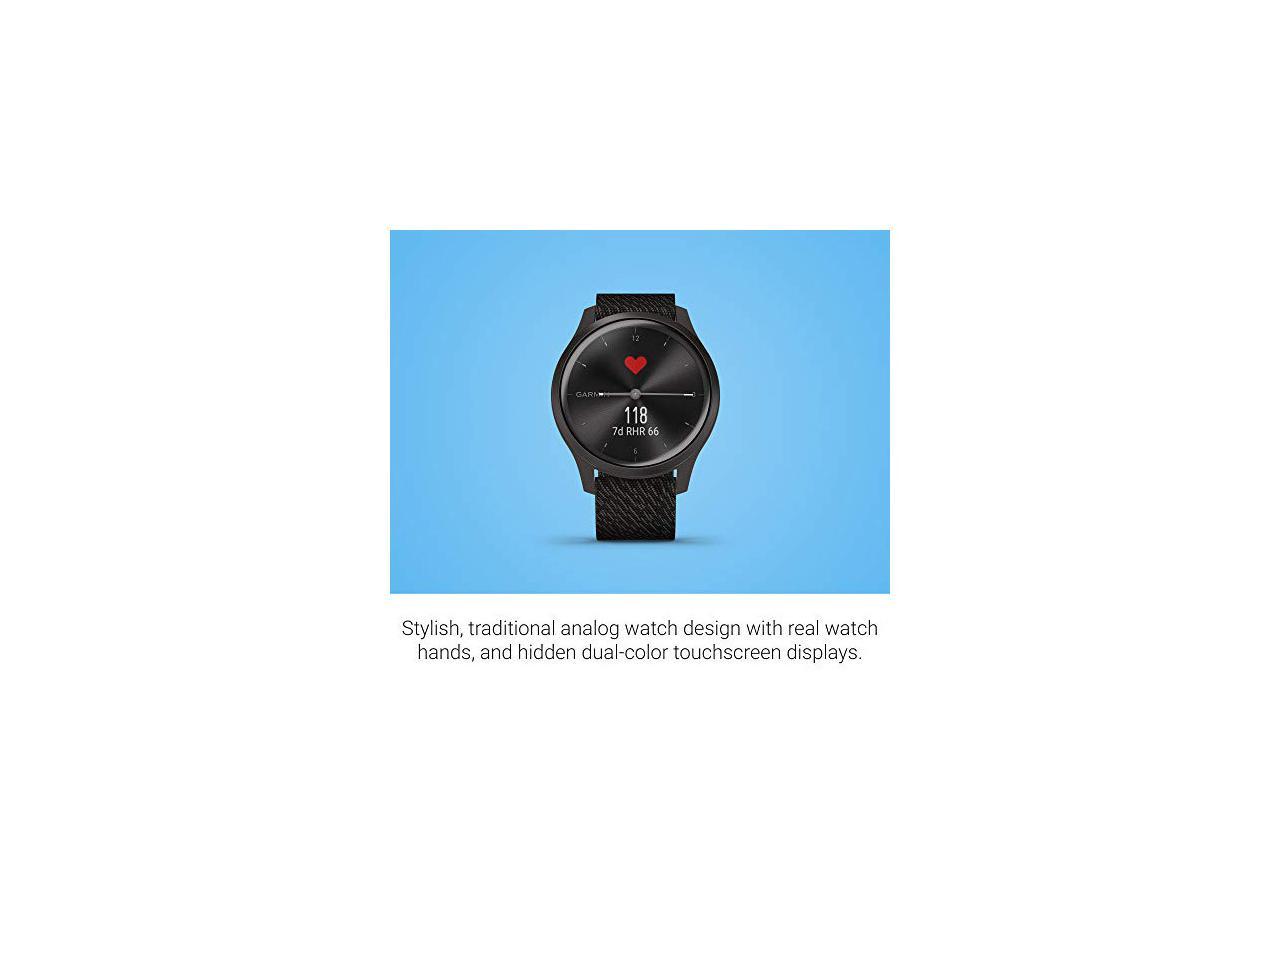 Garmin v〓vomove 3S, Hybrid Smartwatch with Real Watch Hands and Hidden Touchscreen Display, Rose Gold with Navy Blue Case and Band